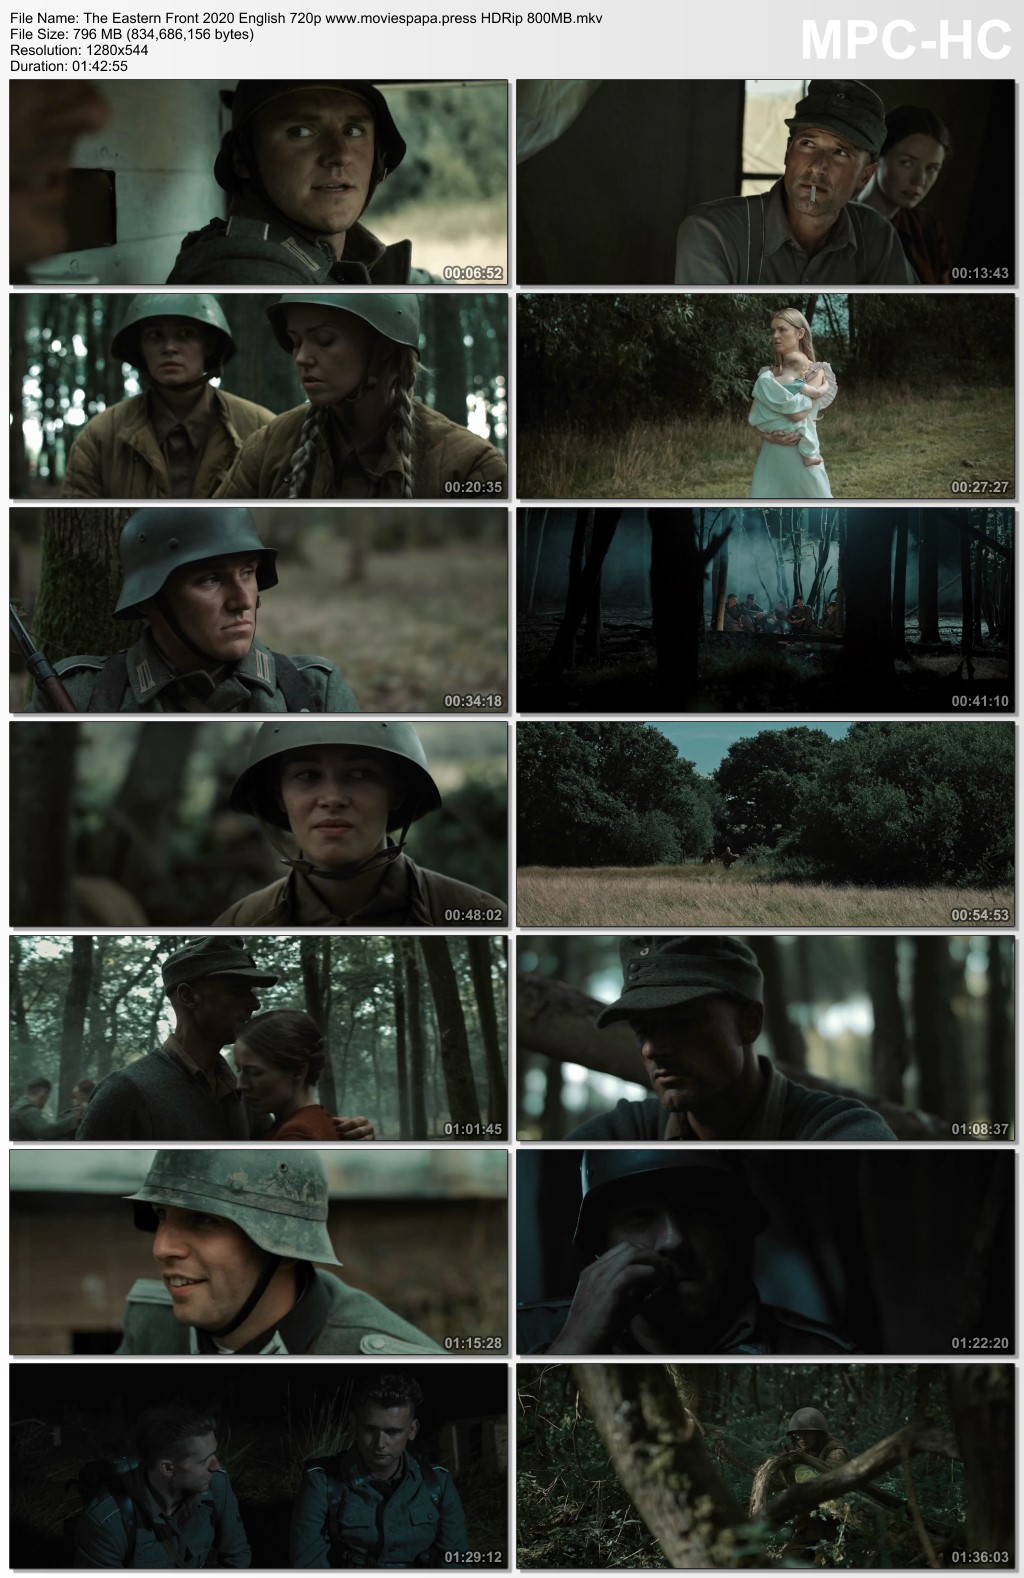 The Eastern Front 2020 English 720p HDRip 800MB Download moviespapa.top